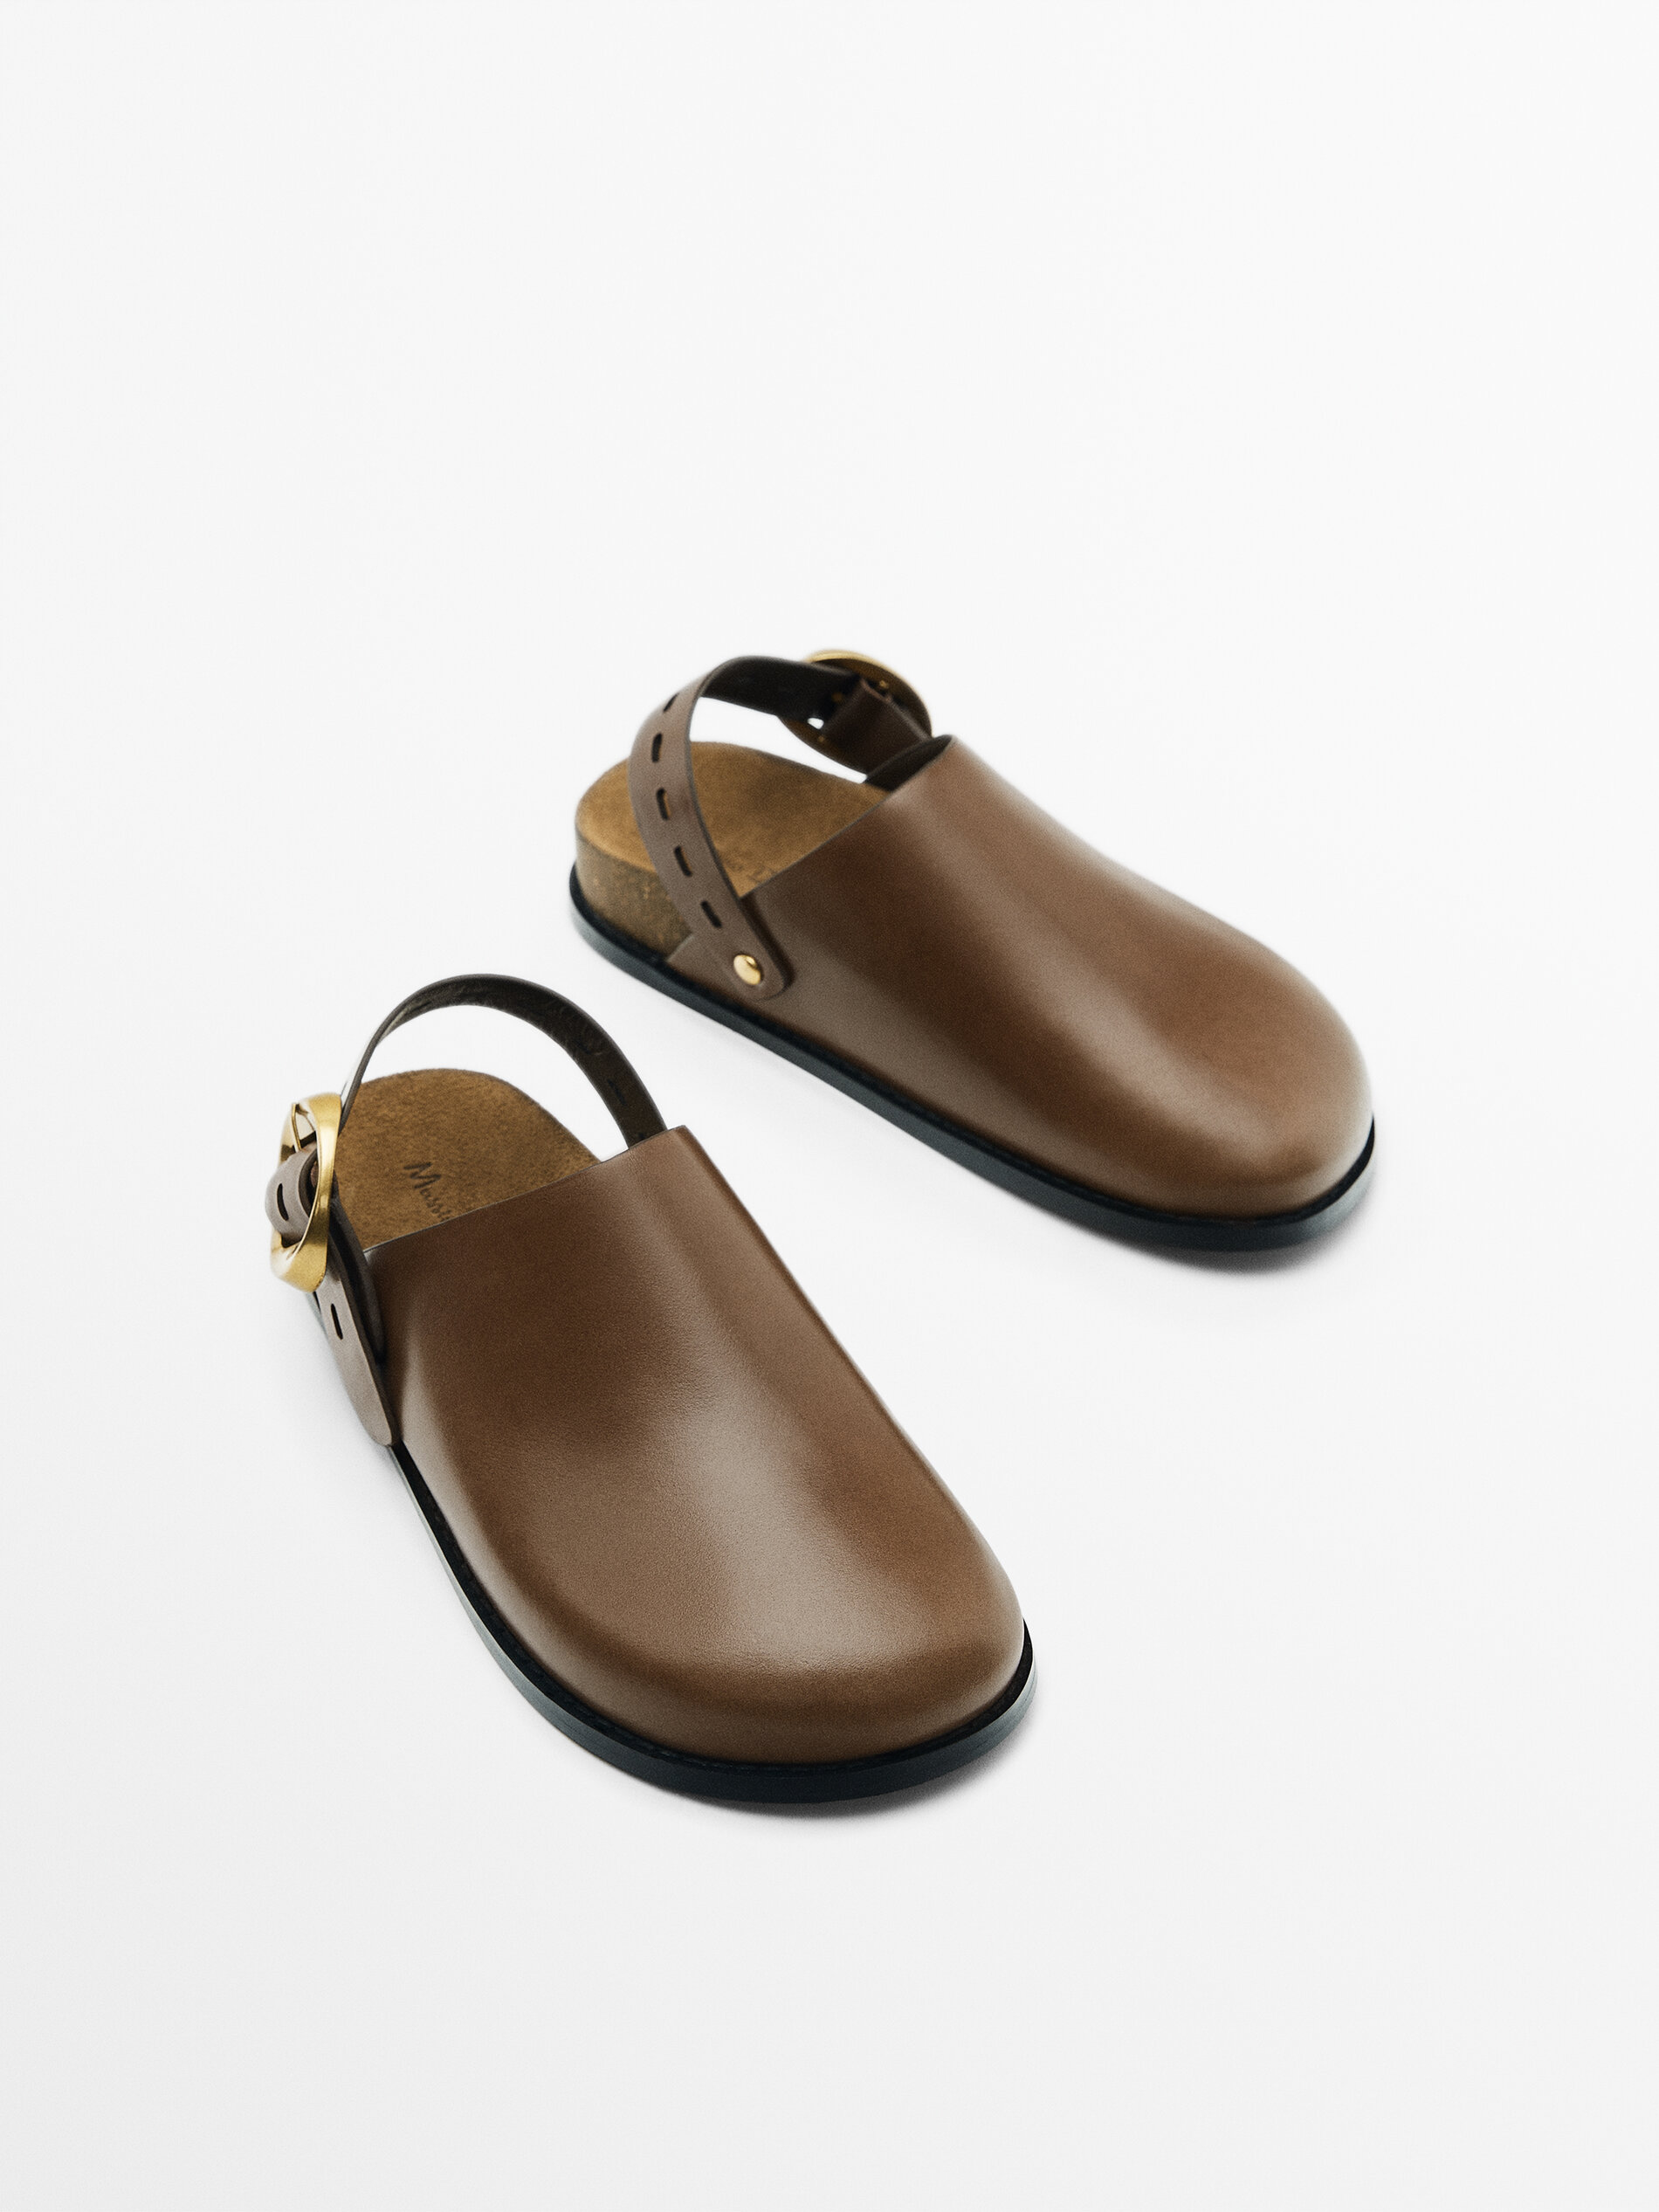 Massimo Dutti Leather Clogs With Metal Buckle - Big Apple Buddy